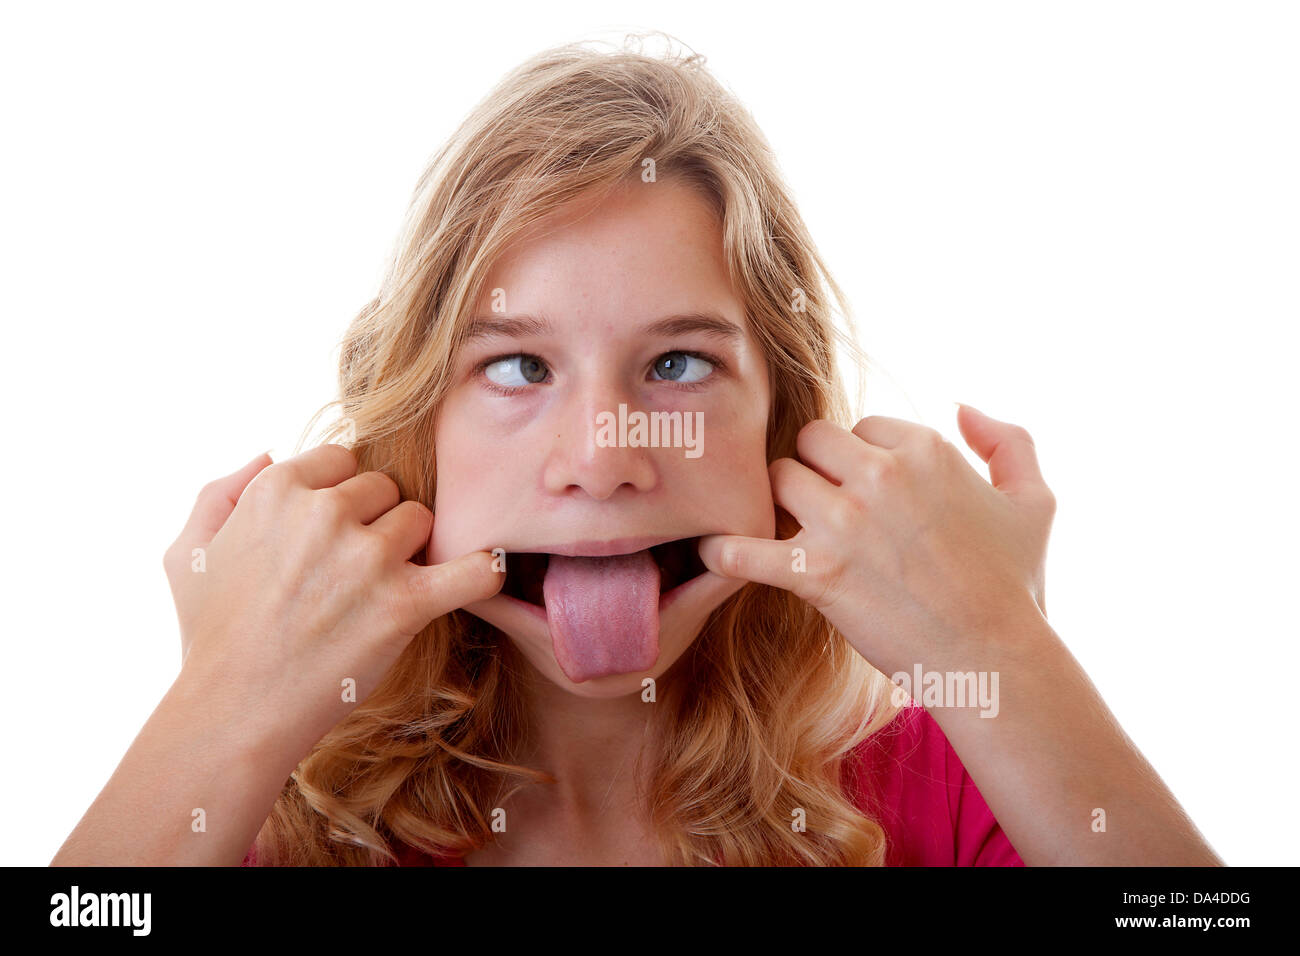 girl makes funny face in closeup over white background Stock Photo ...